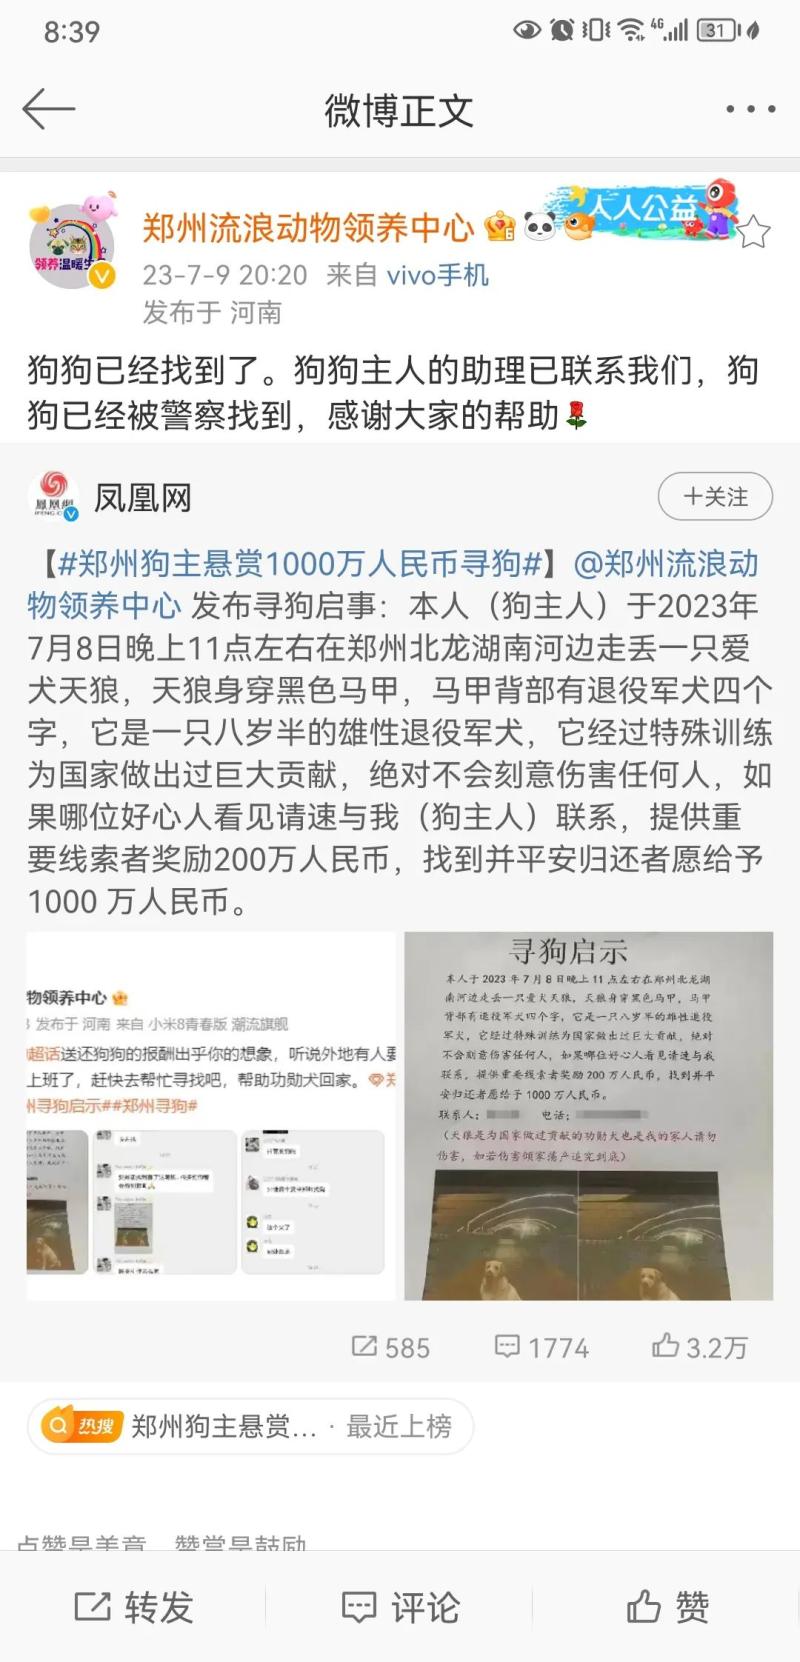 Zhengzhou Wandering Animal Adoption Center: Found, with a reward of 10 million yuan for finding dogs. Latest news on finding dogs | Citizens | Adoption